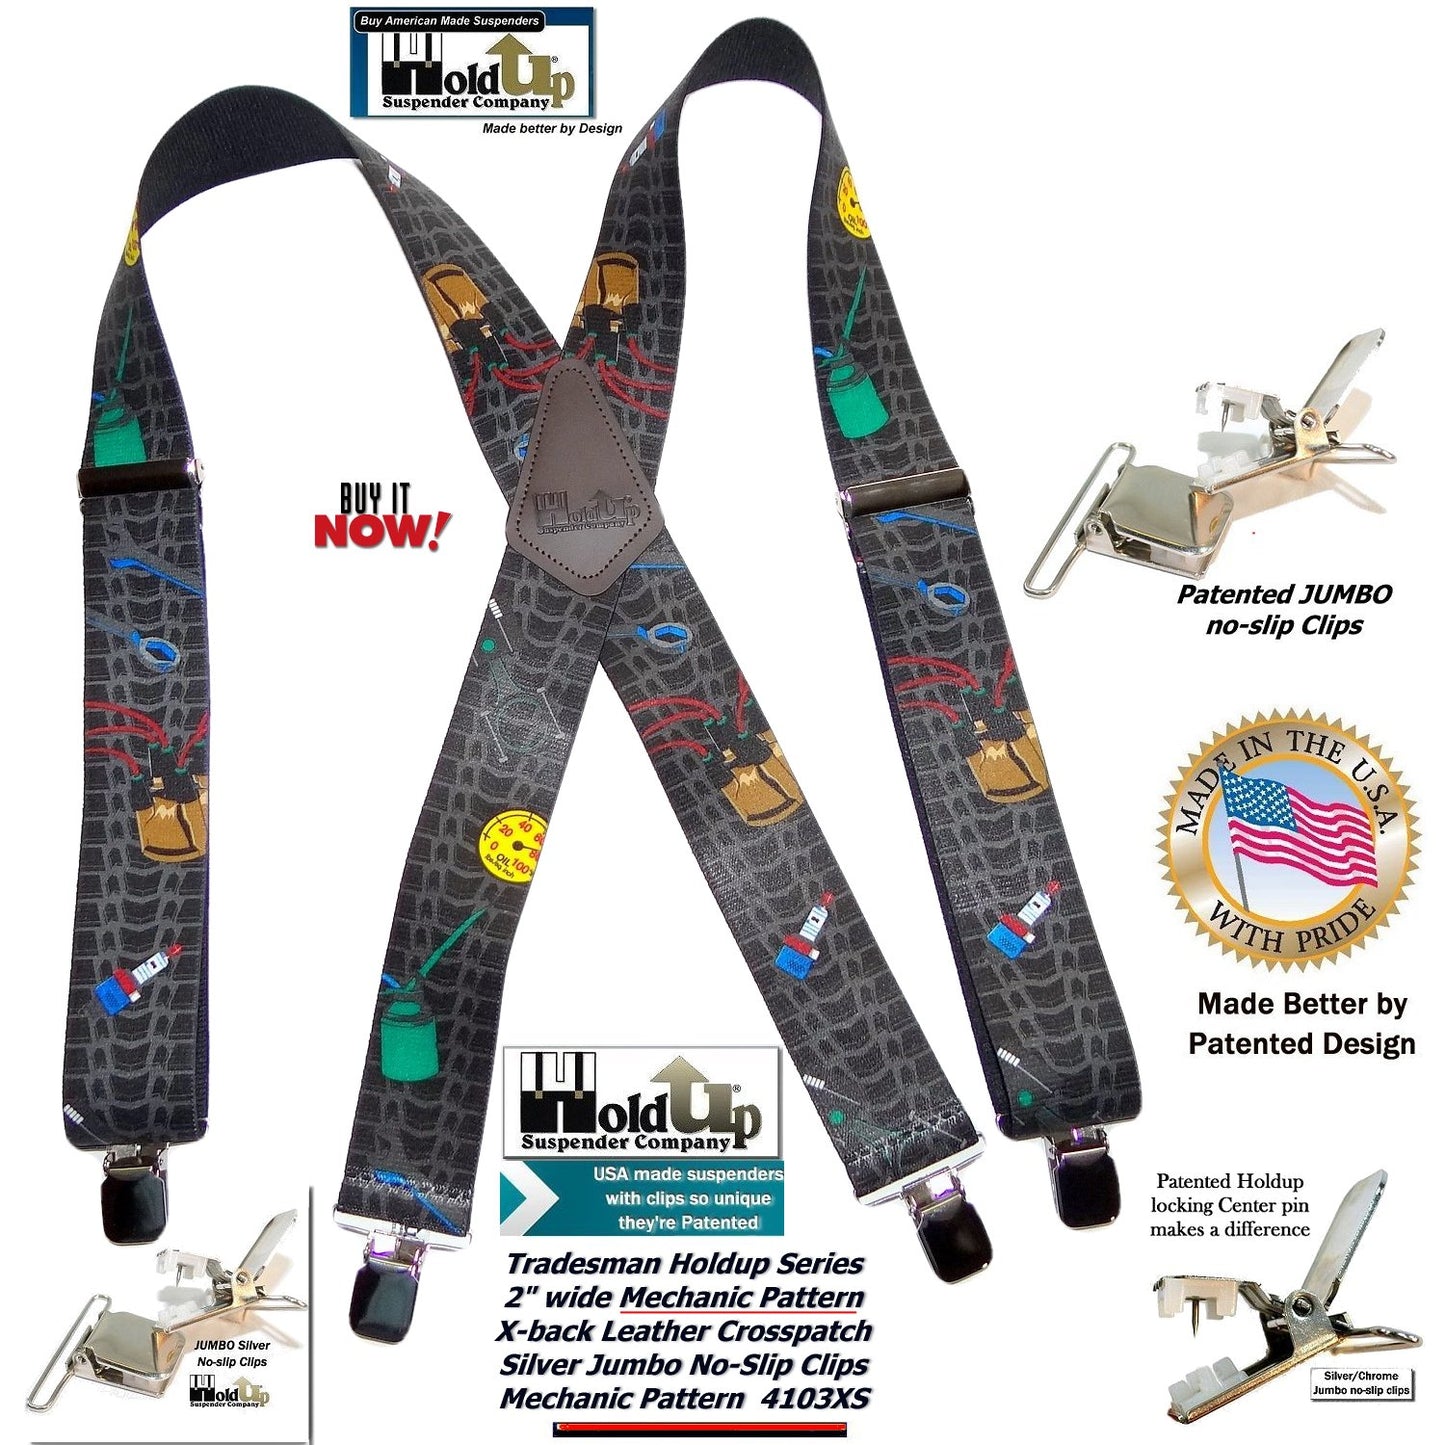 Hold-Ups Tradesman Series 2" Wide in Mechanic Pattern Suspenders with Patented No-slip Silver Clips